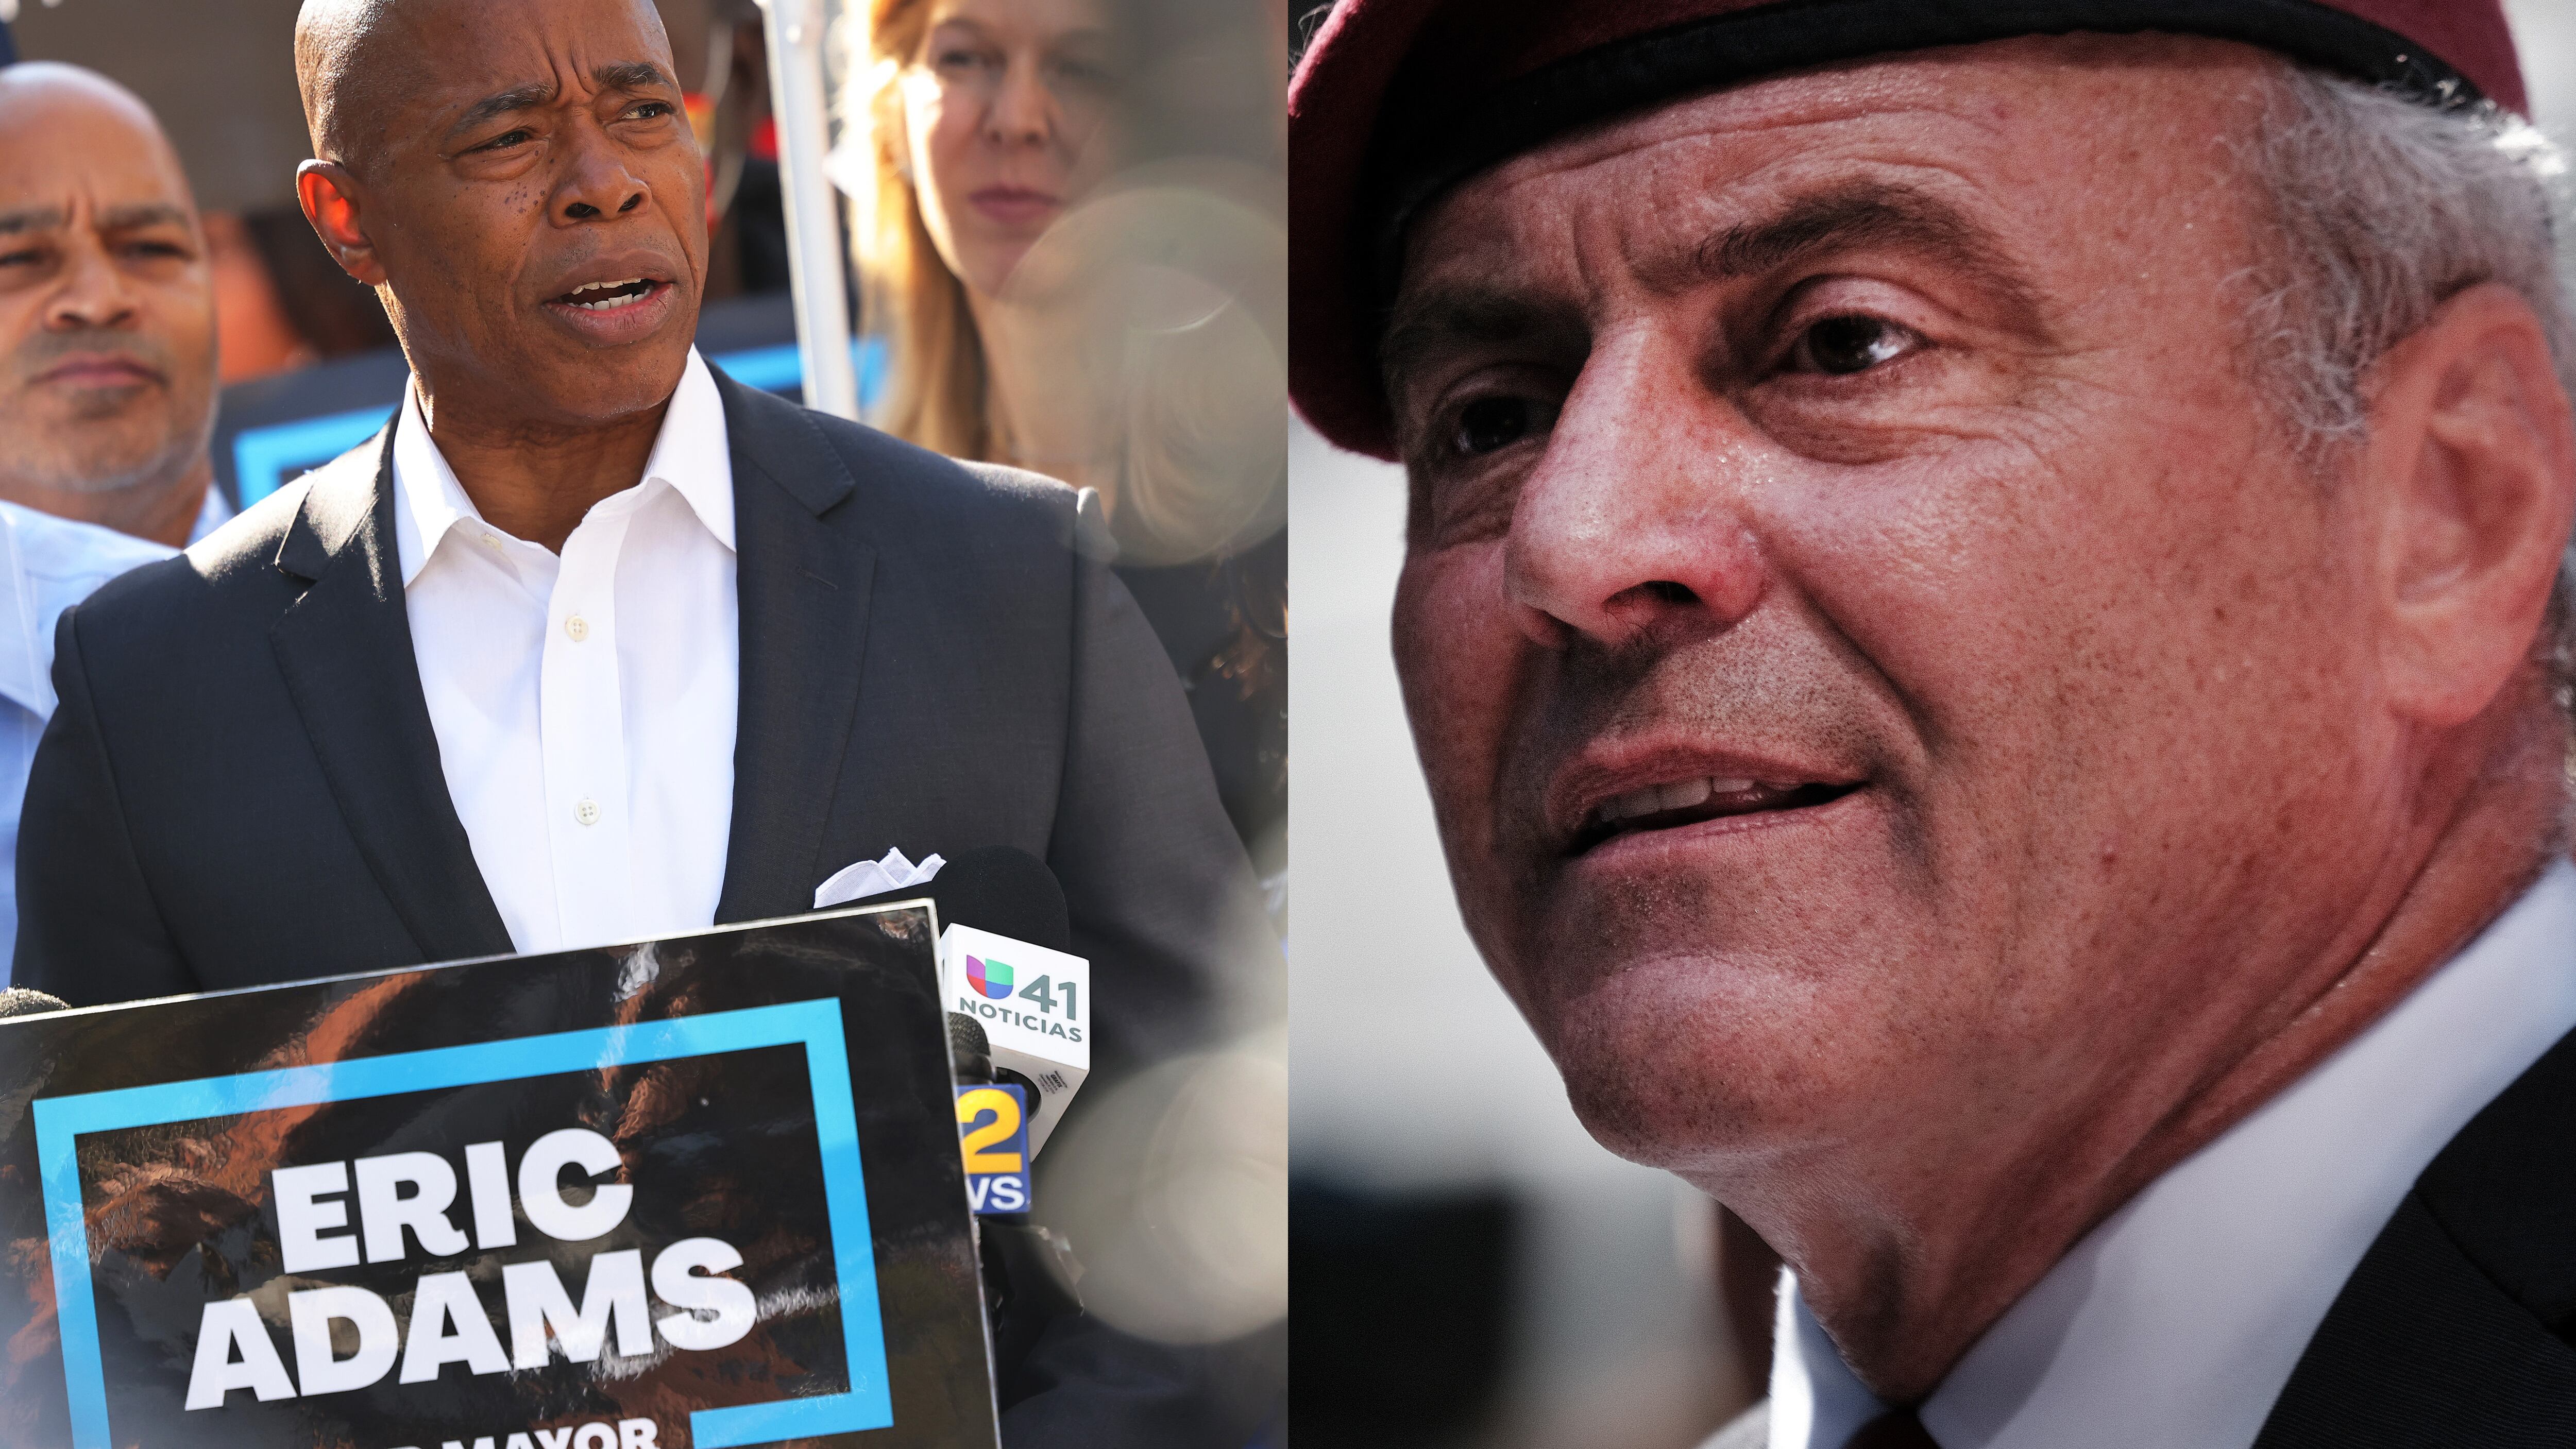 (Left) Eric Adams speaks during a rally, at a podium that reads “Eric Adams For Mayor”. He is surrounded by supporters. (Right) Curtis Sliwa talks to supporters and media in Times Square, wearing his signature red beret.